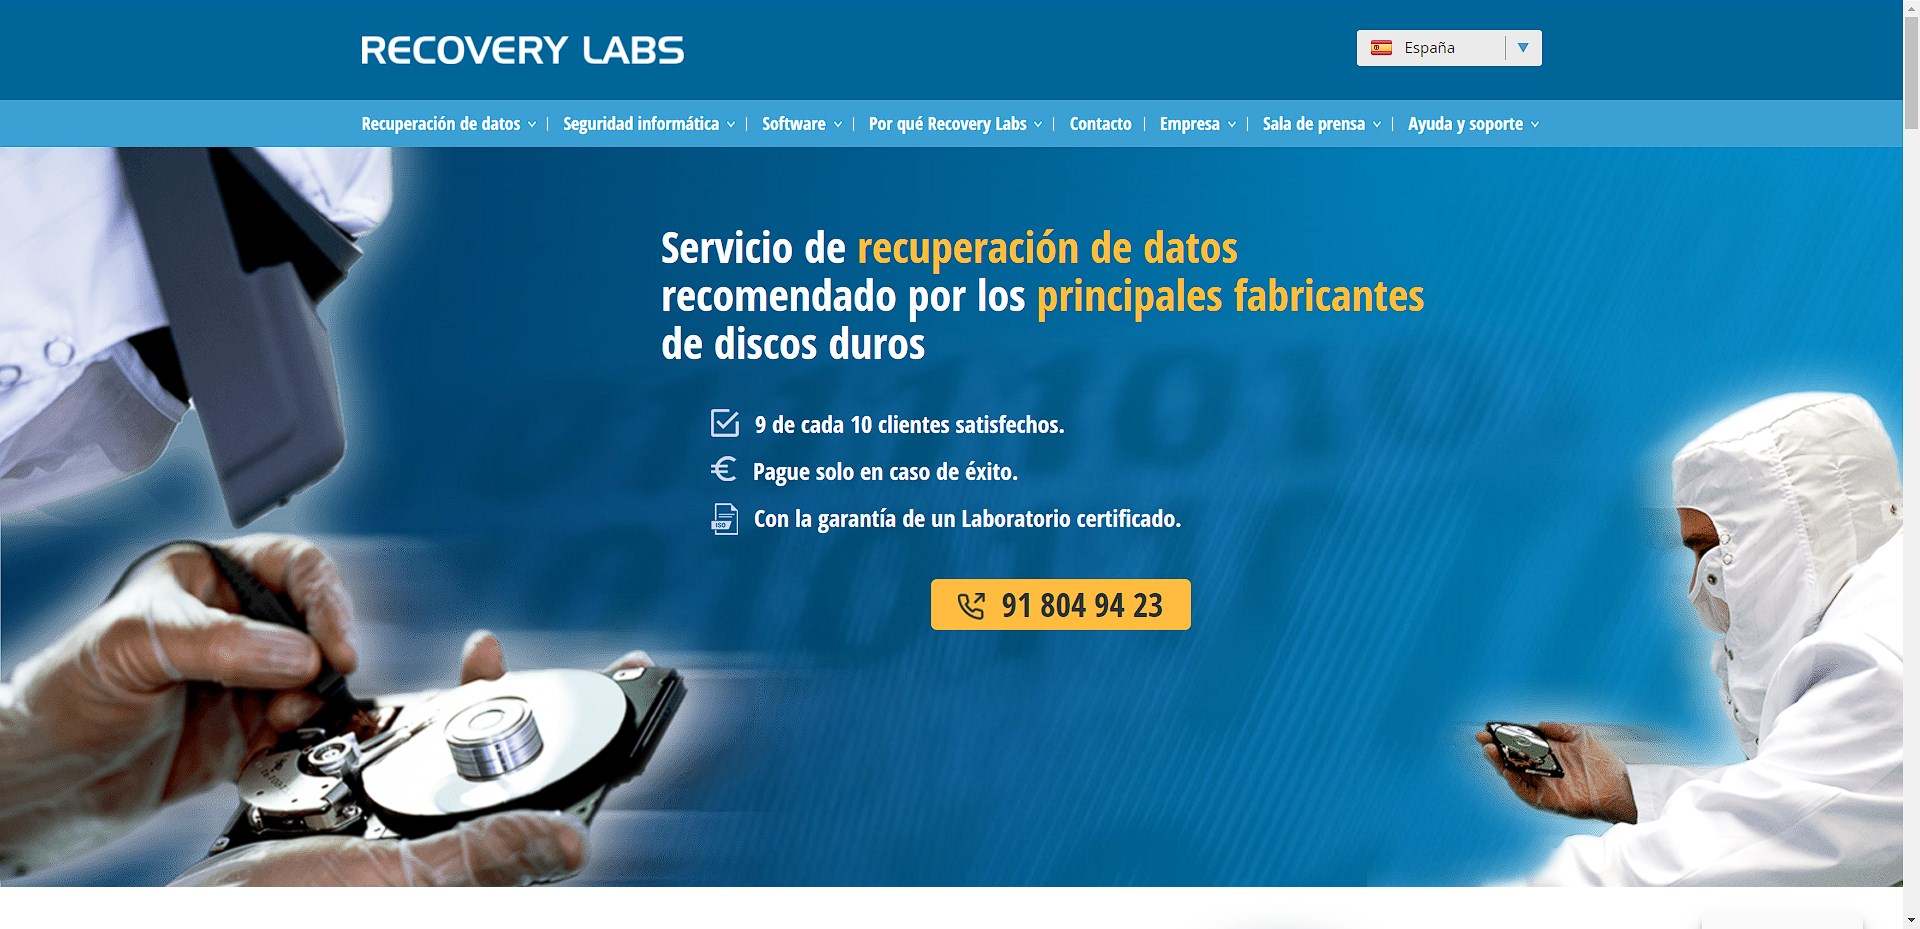 RecoveryLabs